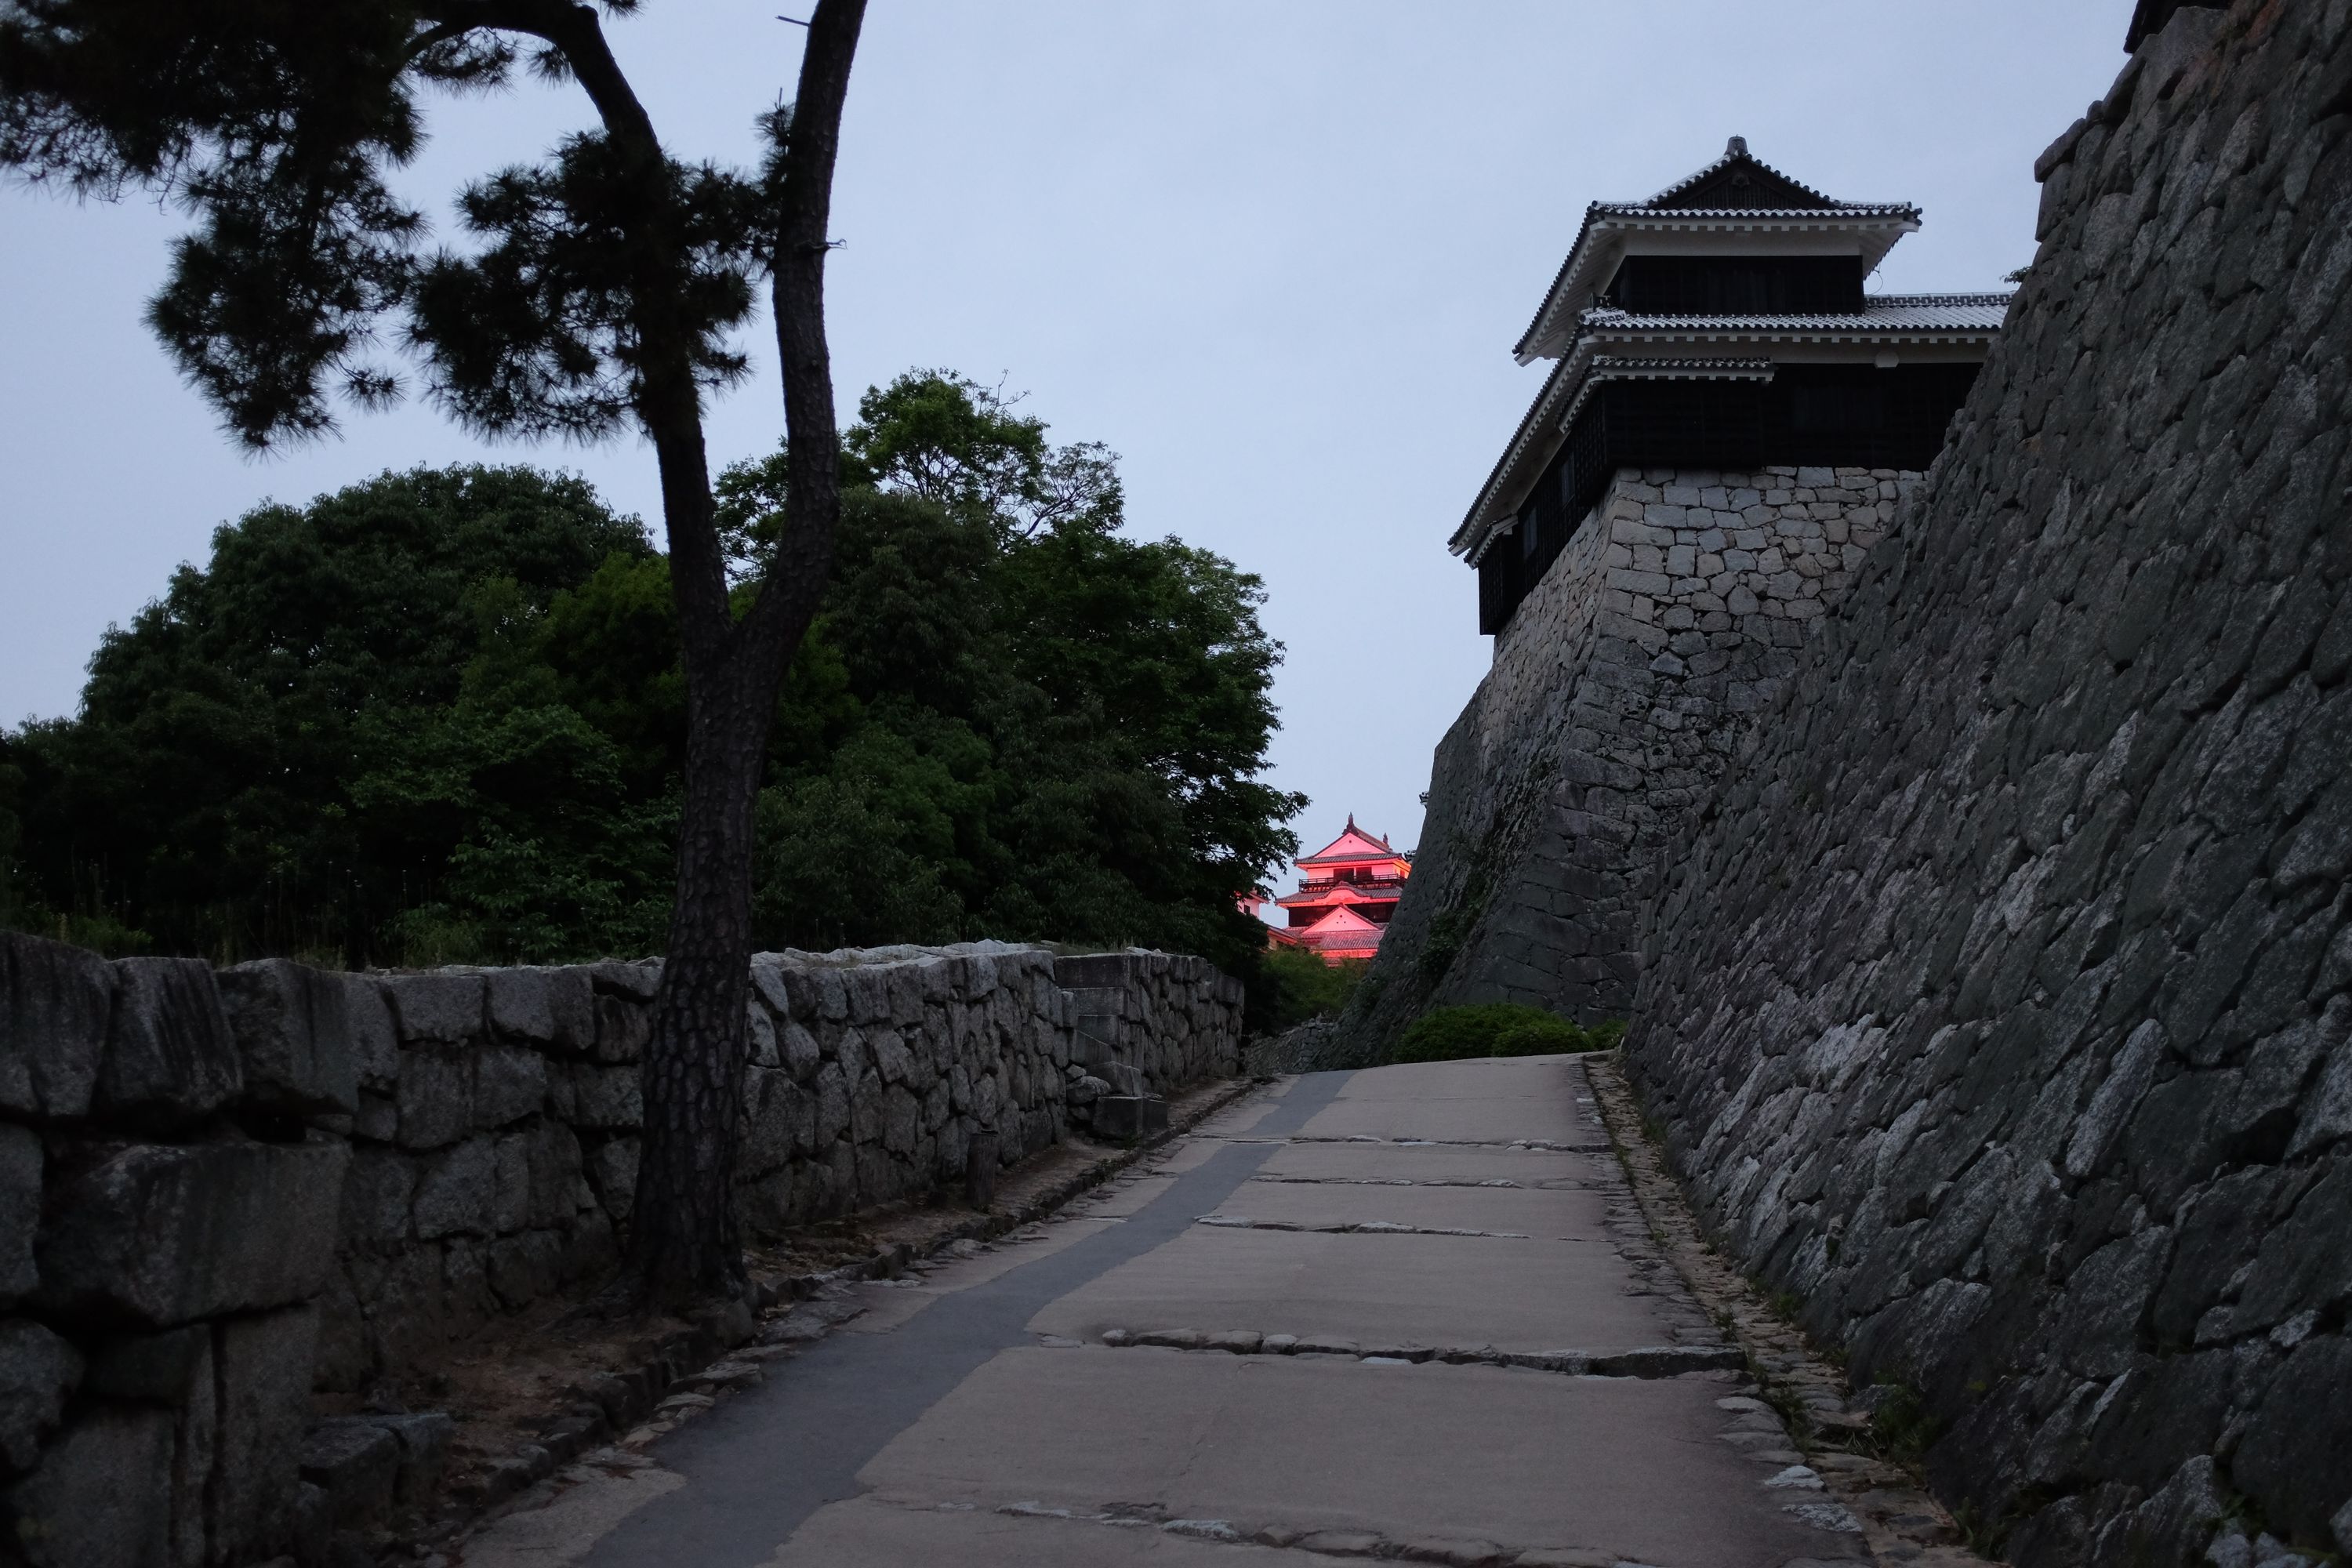 The keep of Matsuyama Castle visible at the end of one of the ramps leading into the castle.